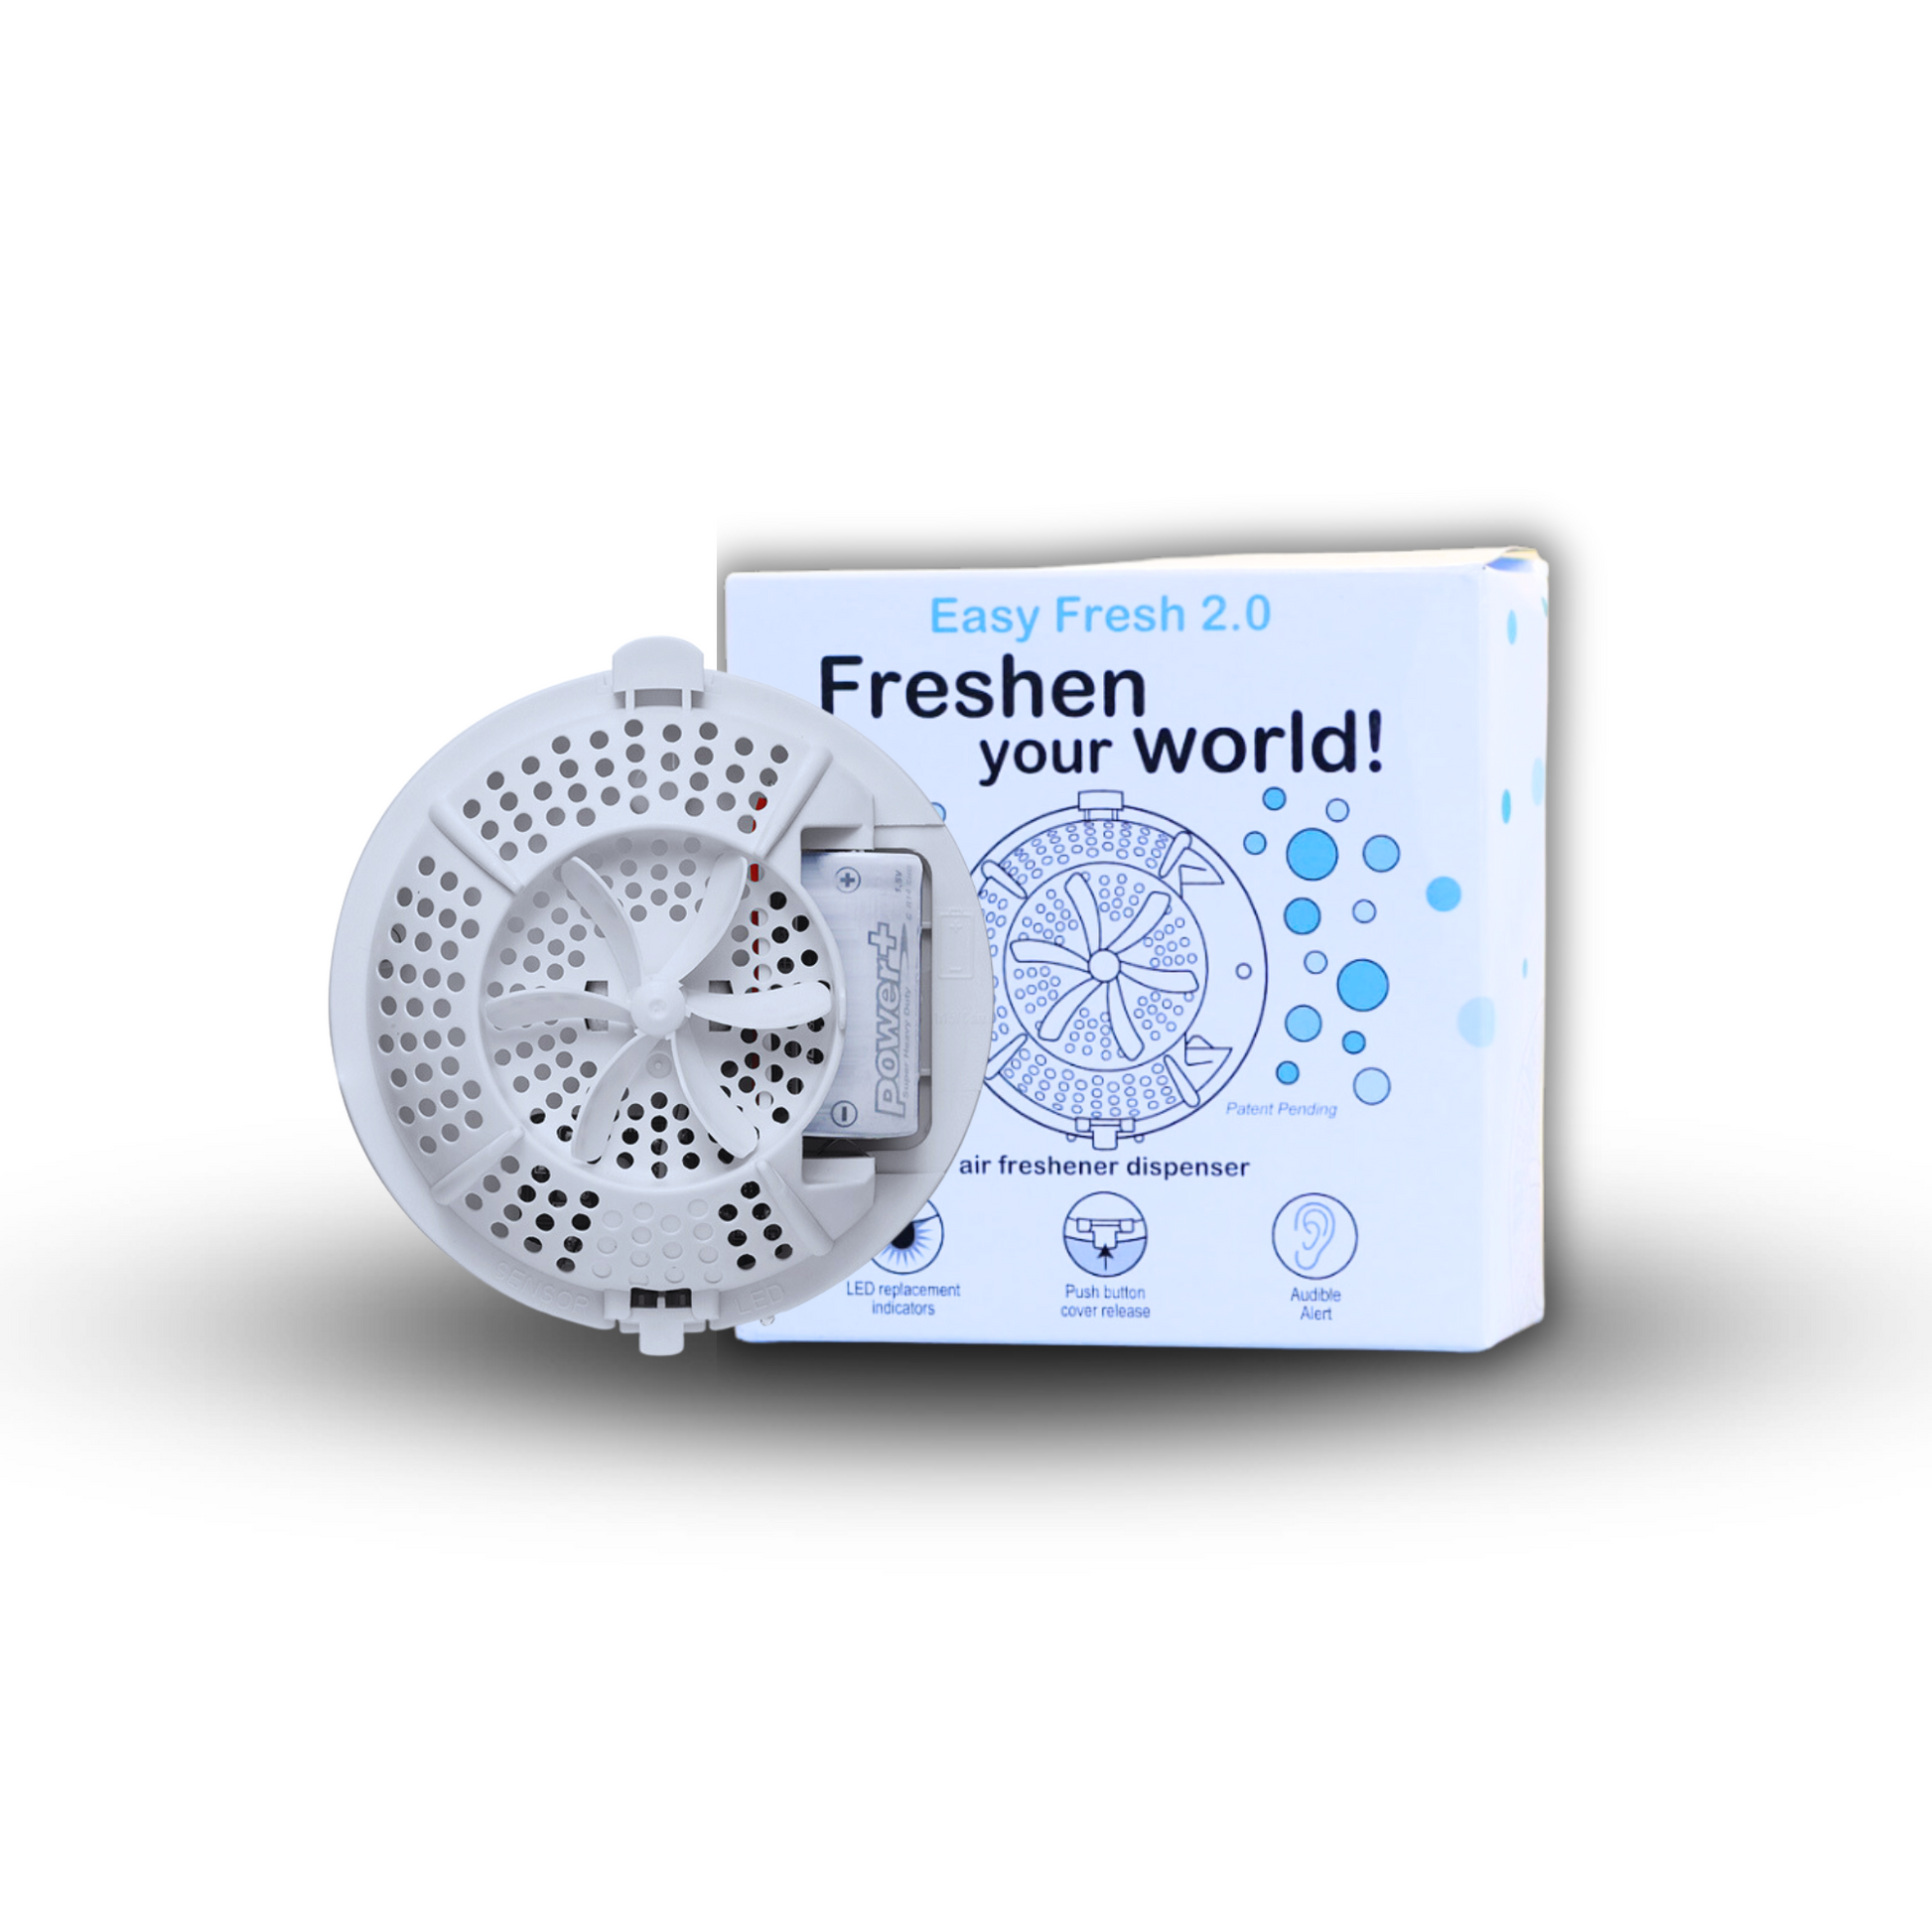 An Image showing the Easy Fresh Fan Dispenser with it's packaging box